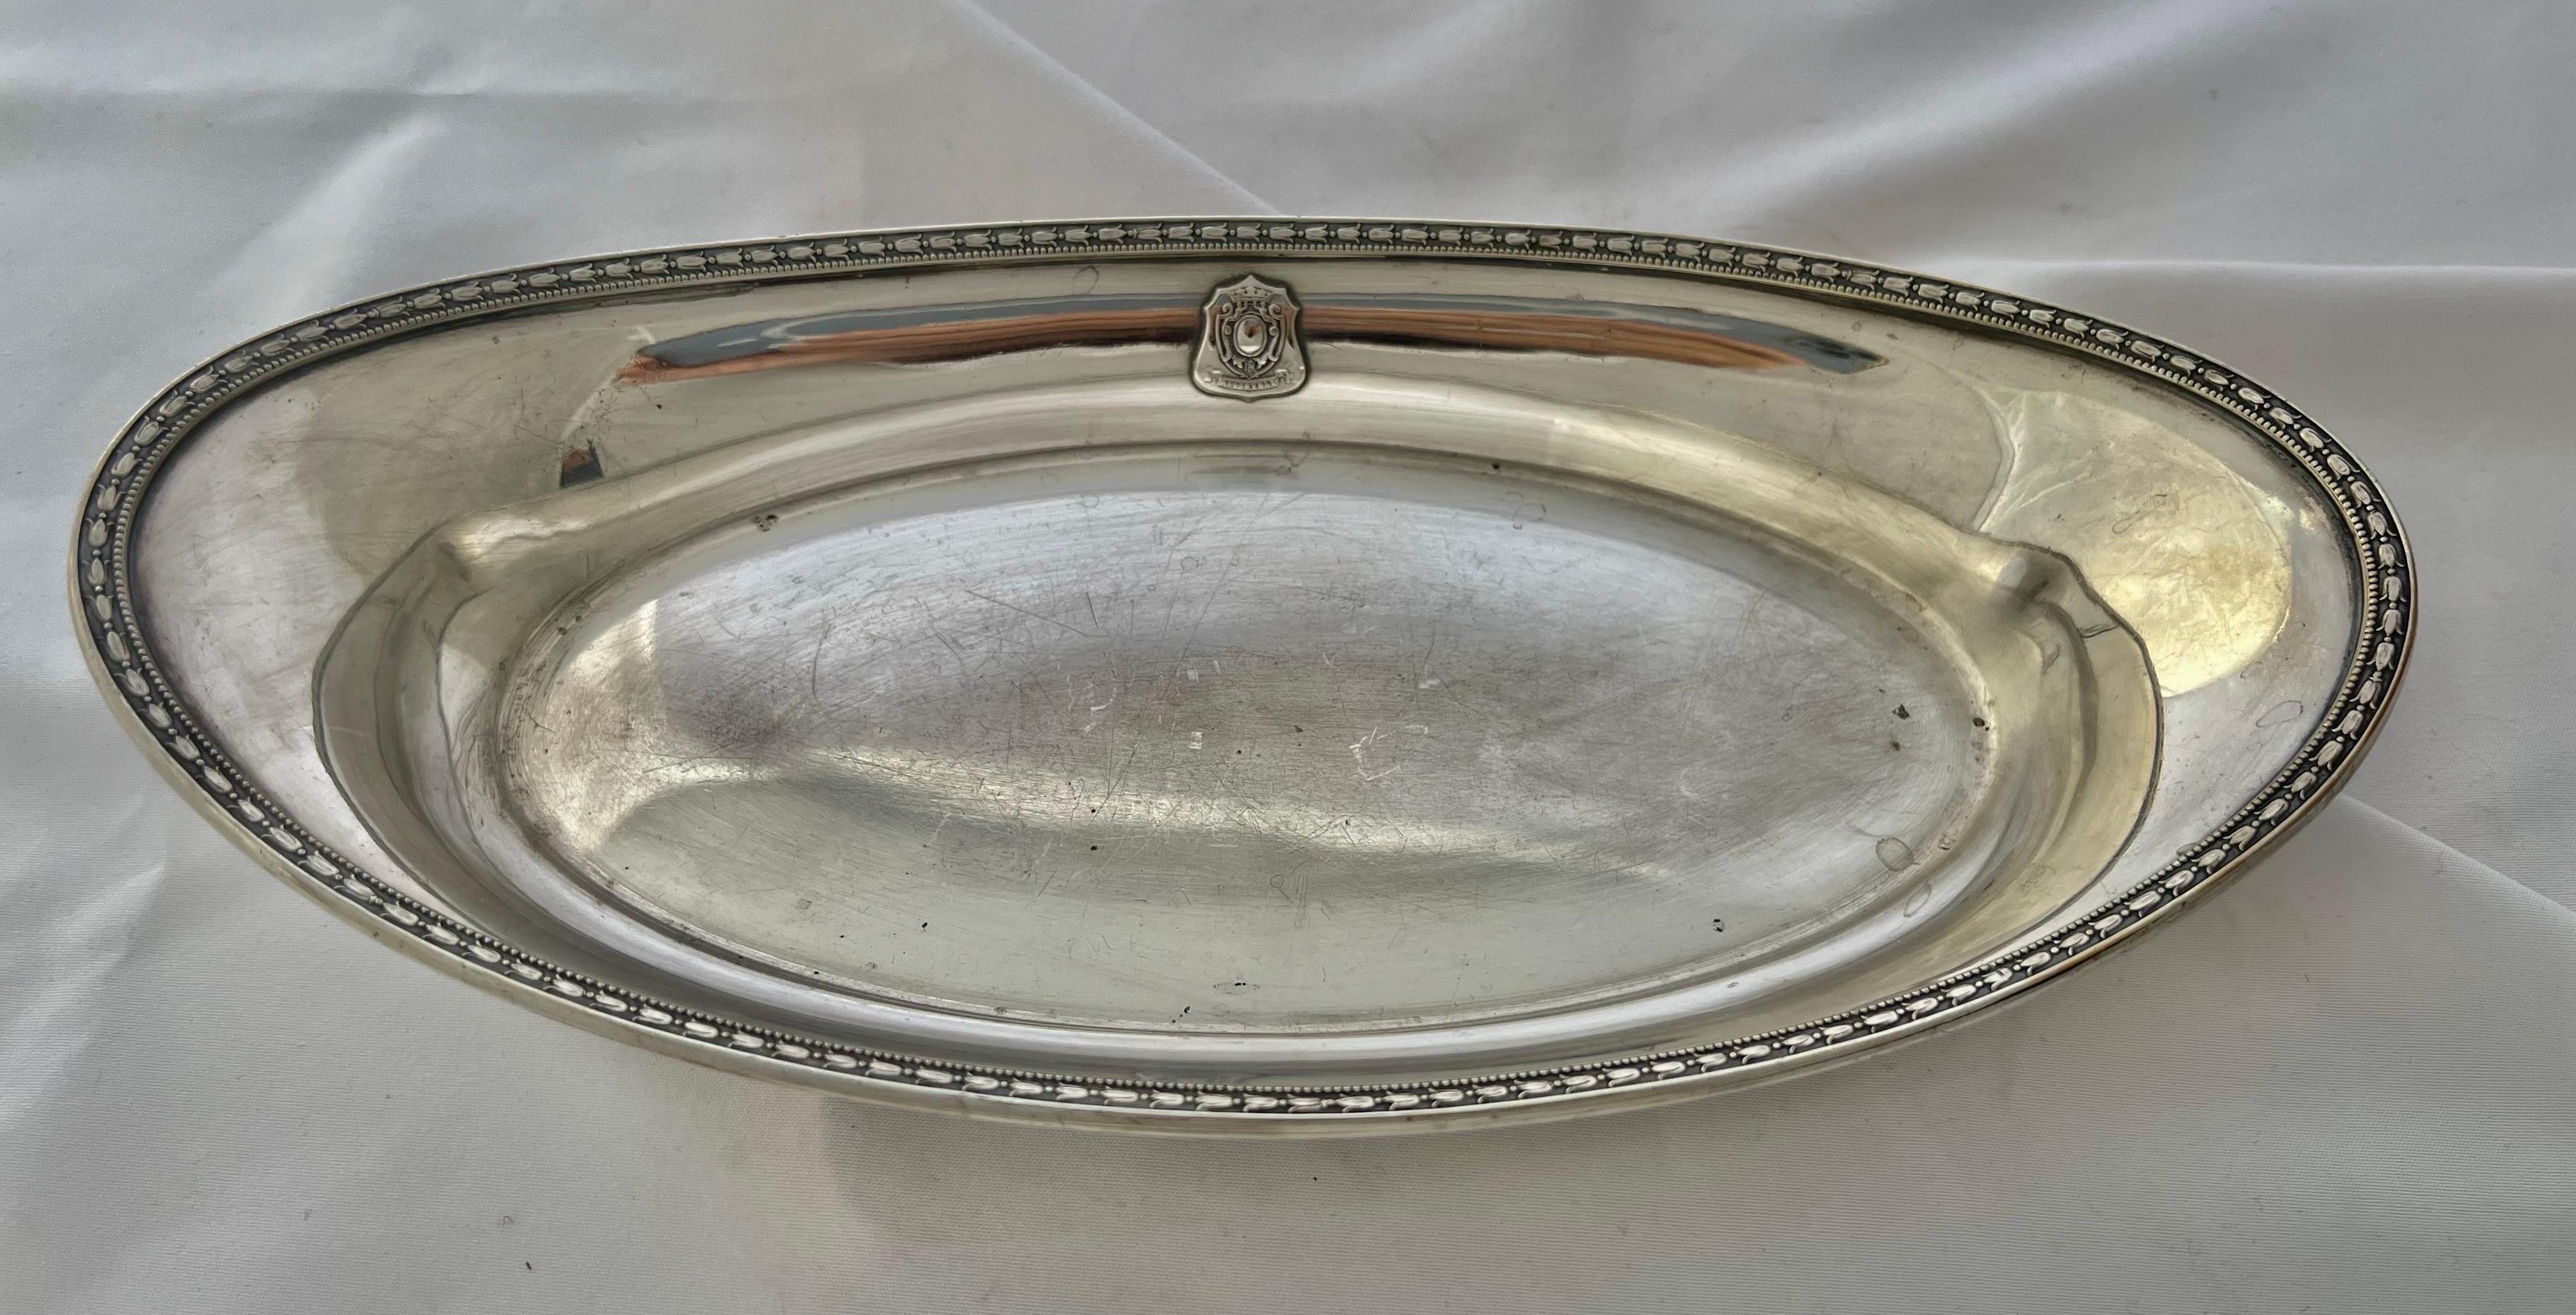 Oval Gorham silver-plated dish made for the iconic Hollywood Rosevelt Hotel in Los Angeles. The dish is beautiful made with fine detailing around the perimeter of the dish. There is a small shield with the hotel's name. It is a great piece of early